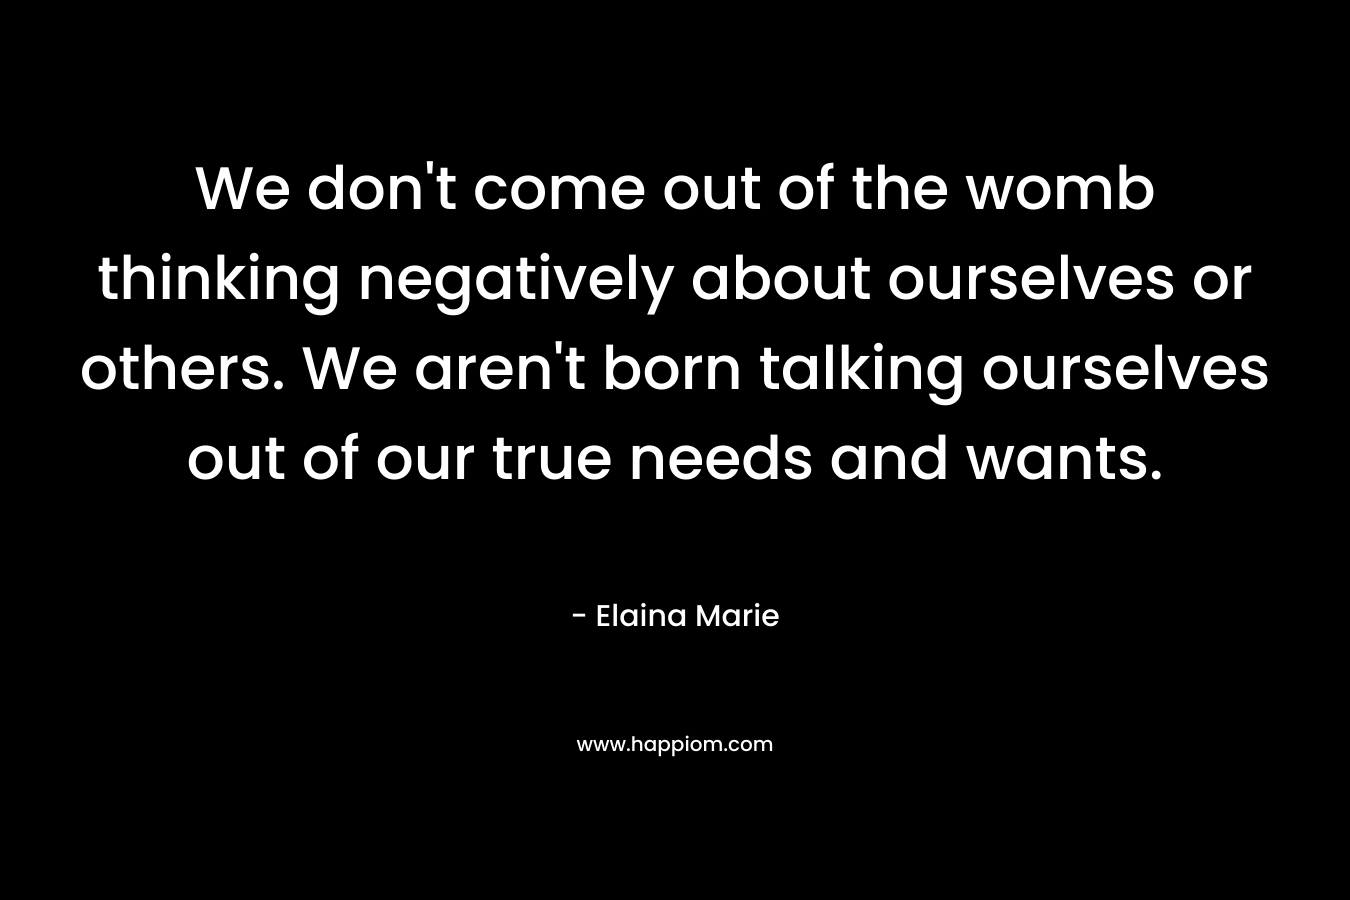 We don't come out of the womb thinking negatively about ourselves or others. We aren't born talking ourselves out of our true needs and wants.